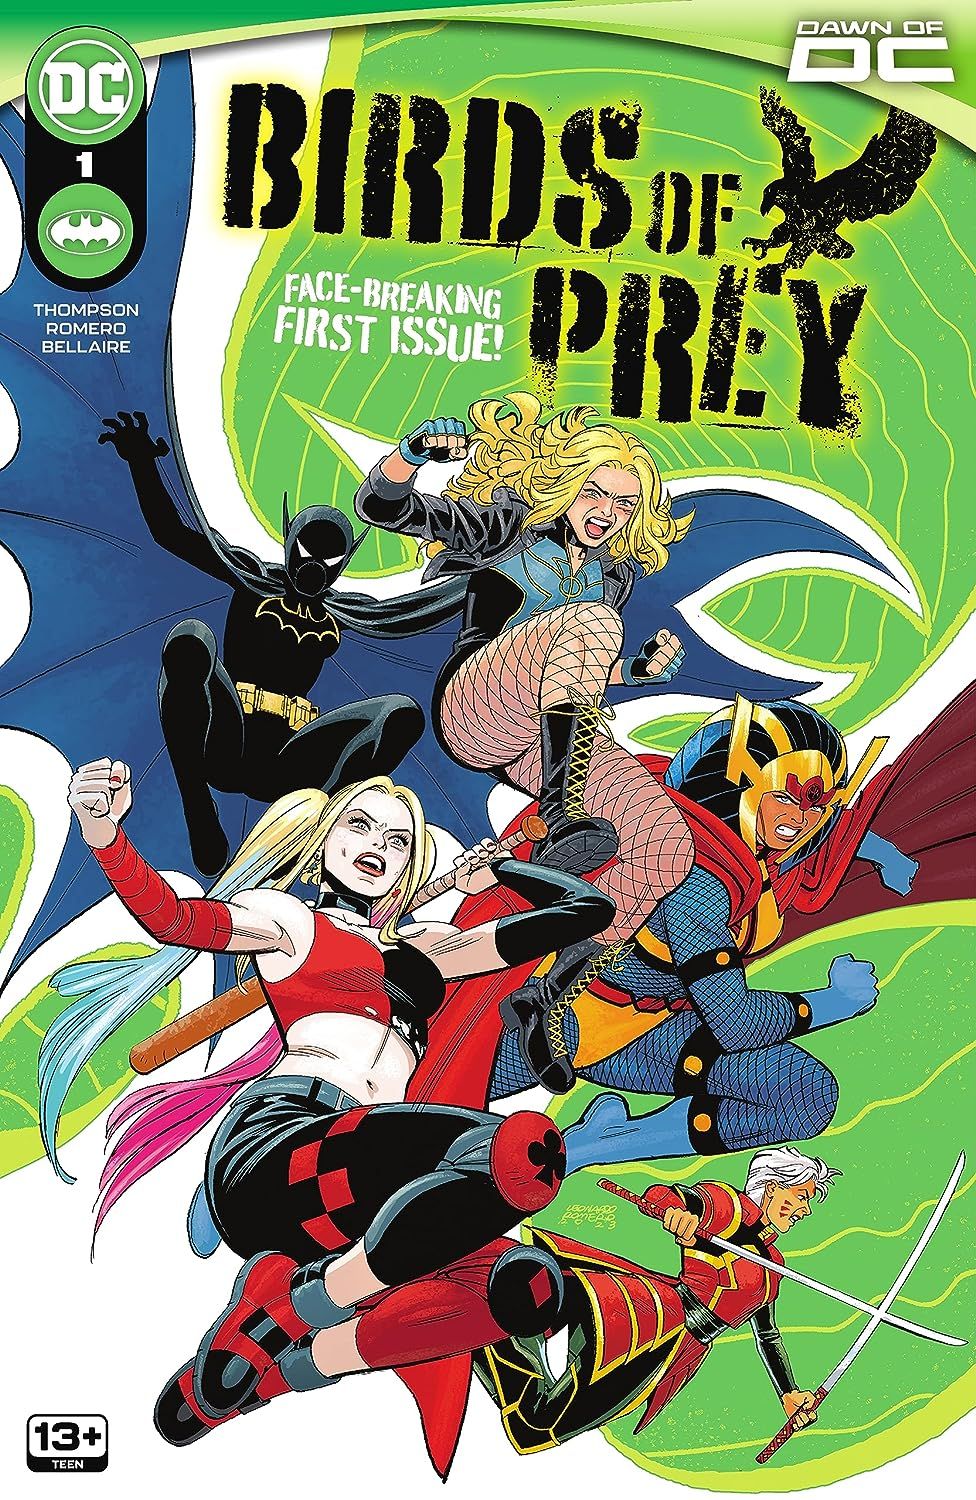 the cover of Birds of Prey #1